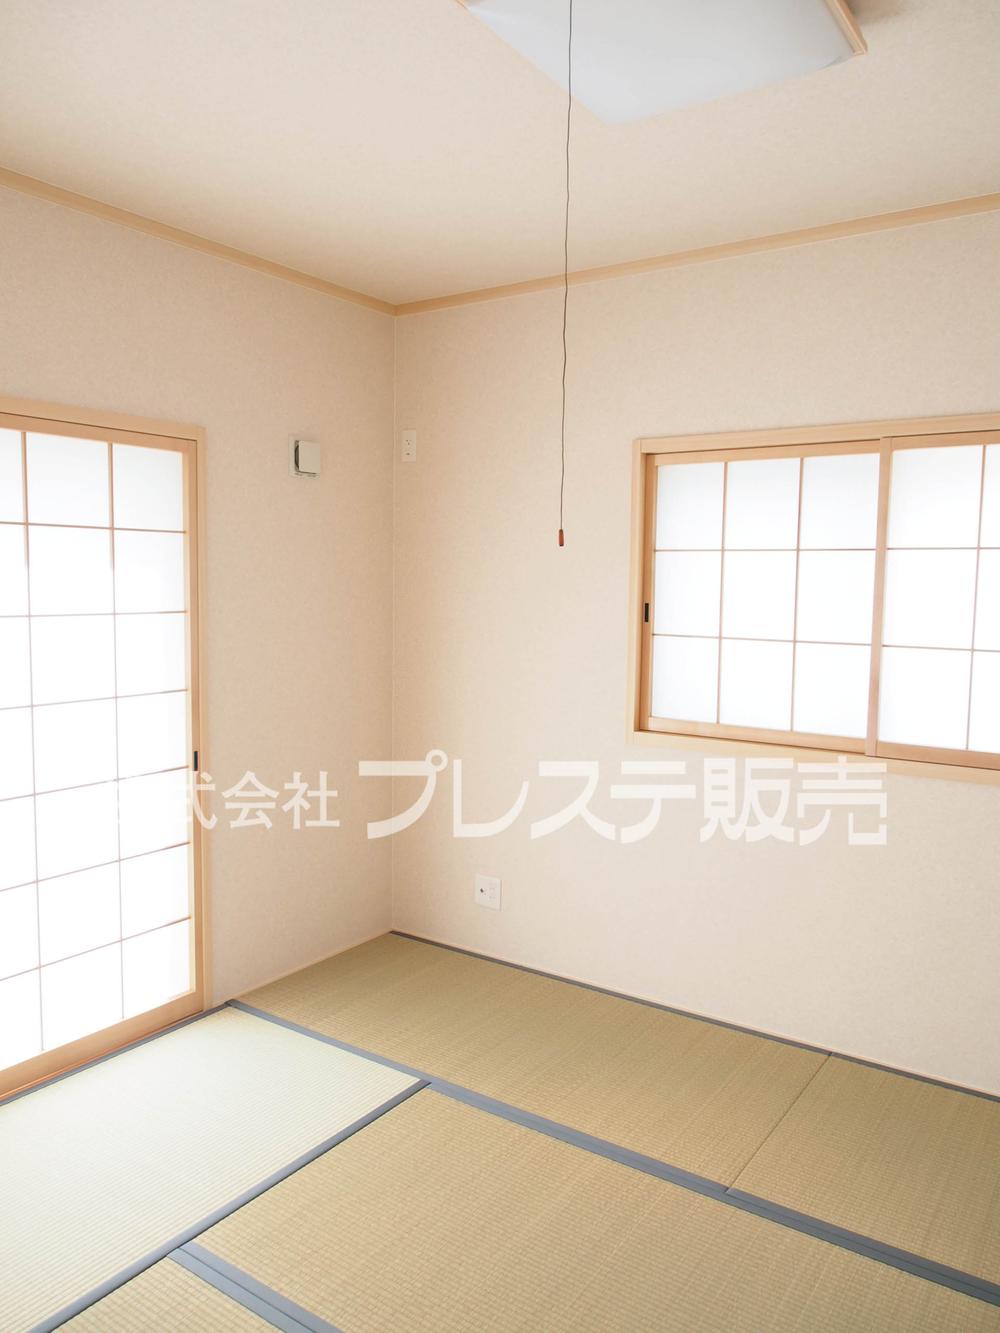 Same specifications photos (Other introspection). Because it is a south-facing Japanese-style room, Good per yang